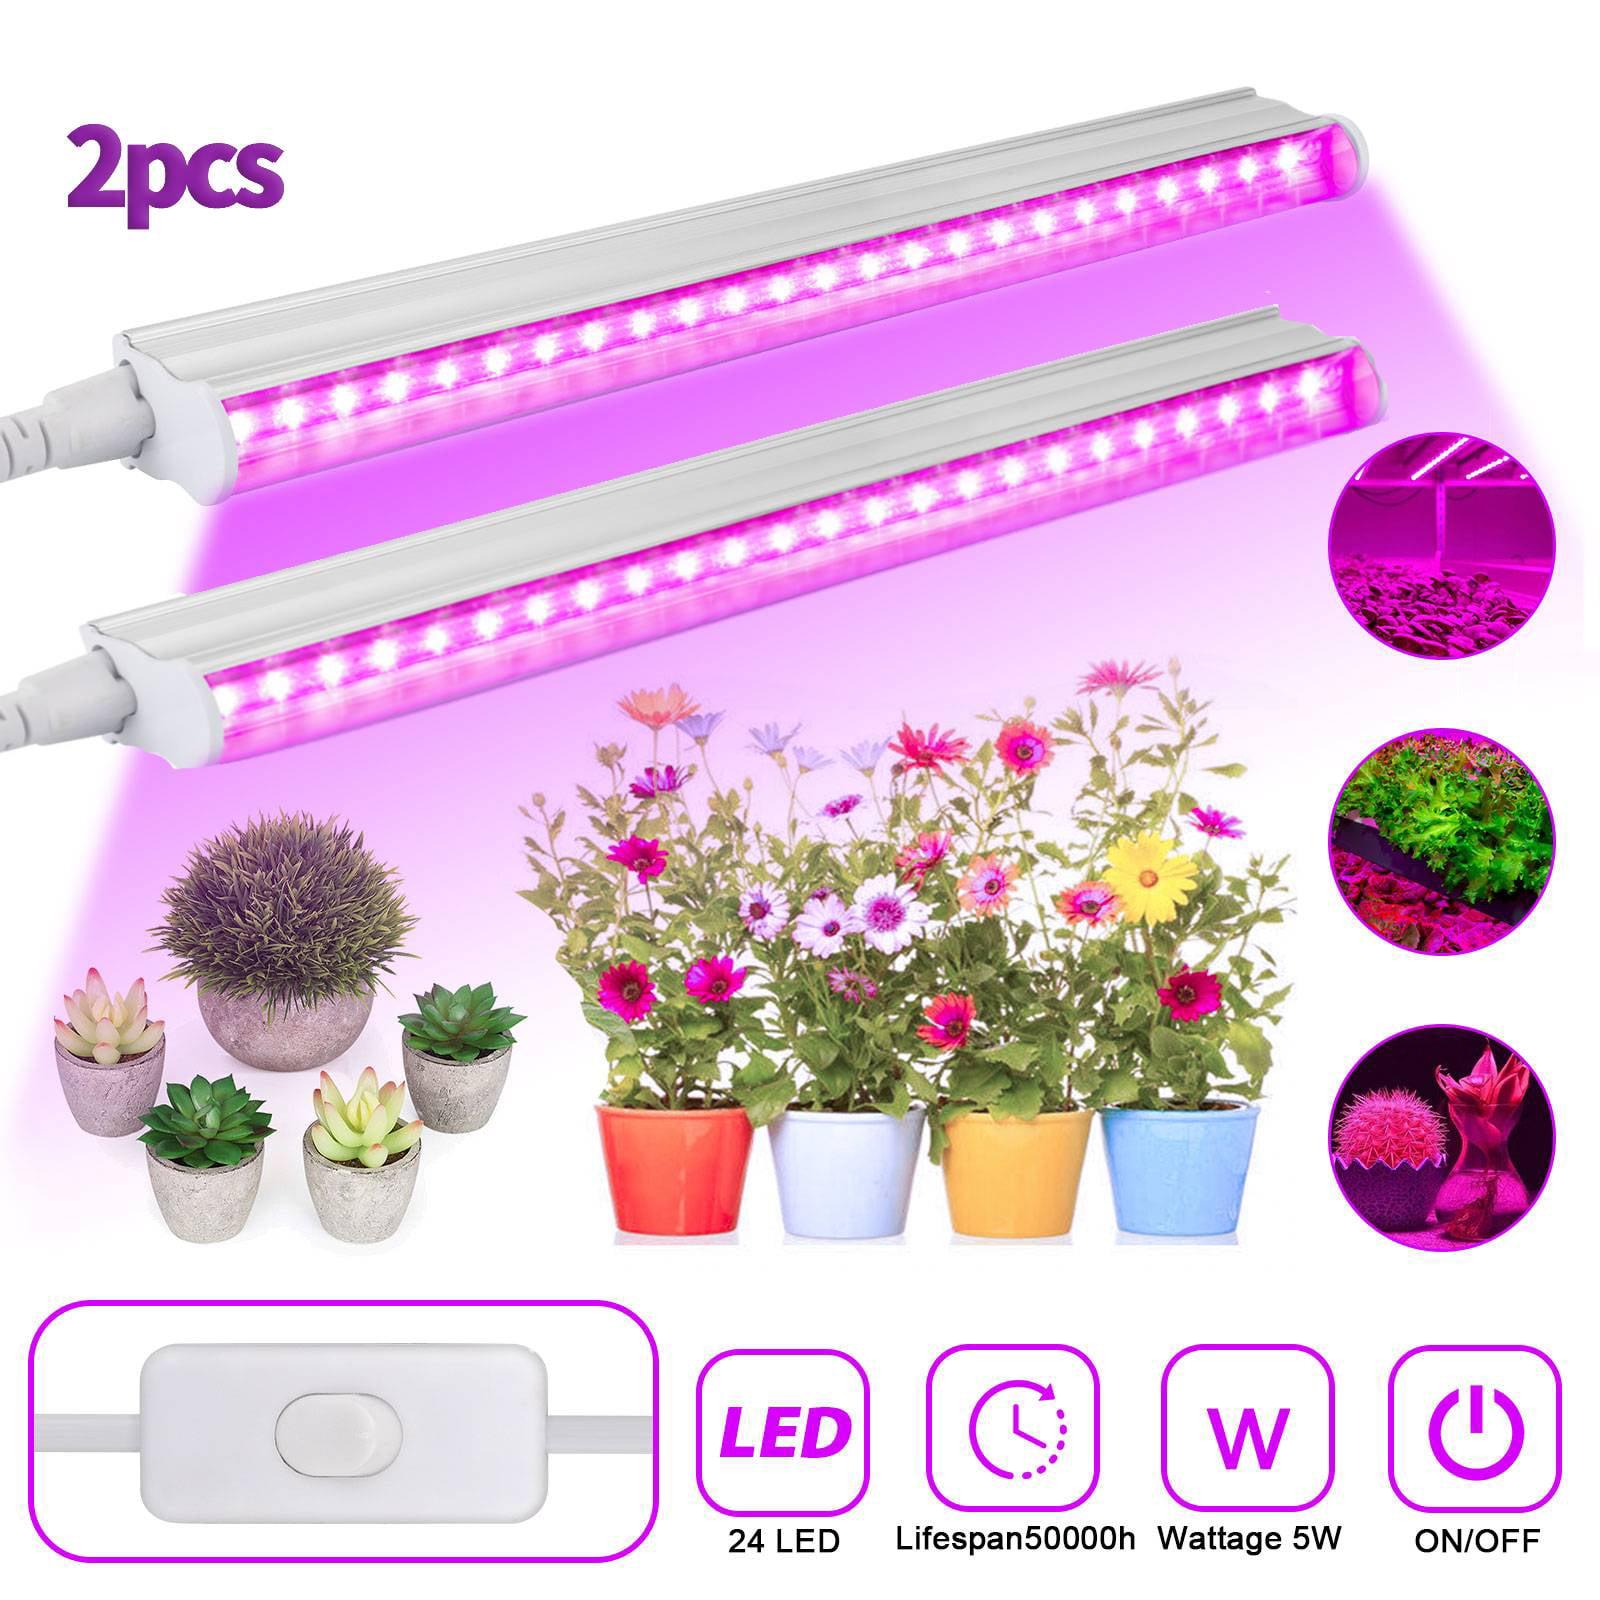 E27 LED Grow Light Red+Blue 220V Lamp Clip For Hydroponics Plants Fostering 19C 